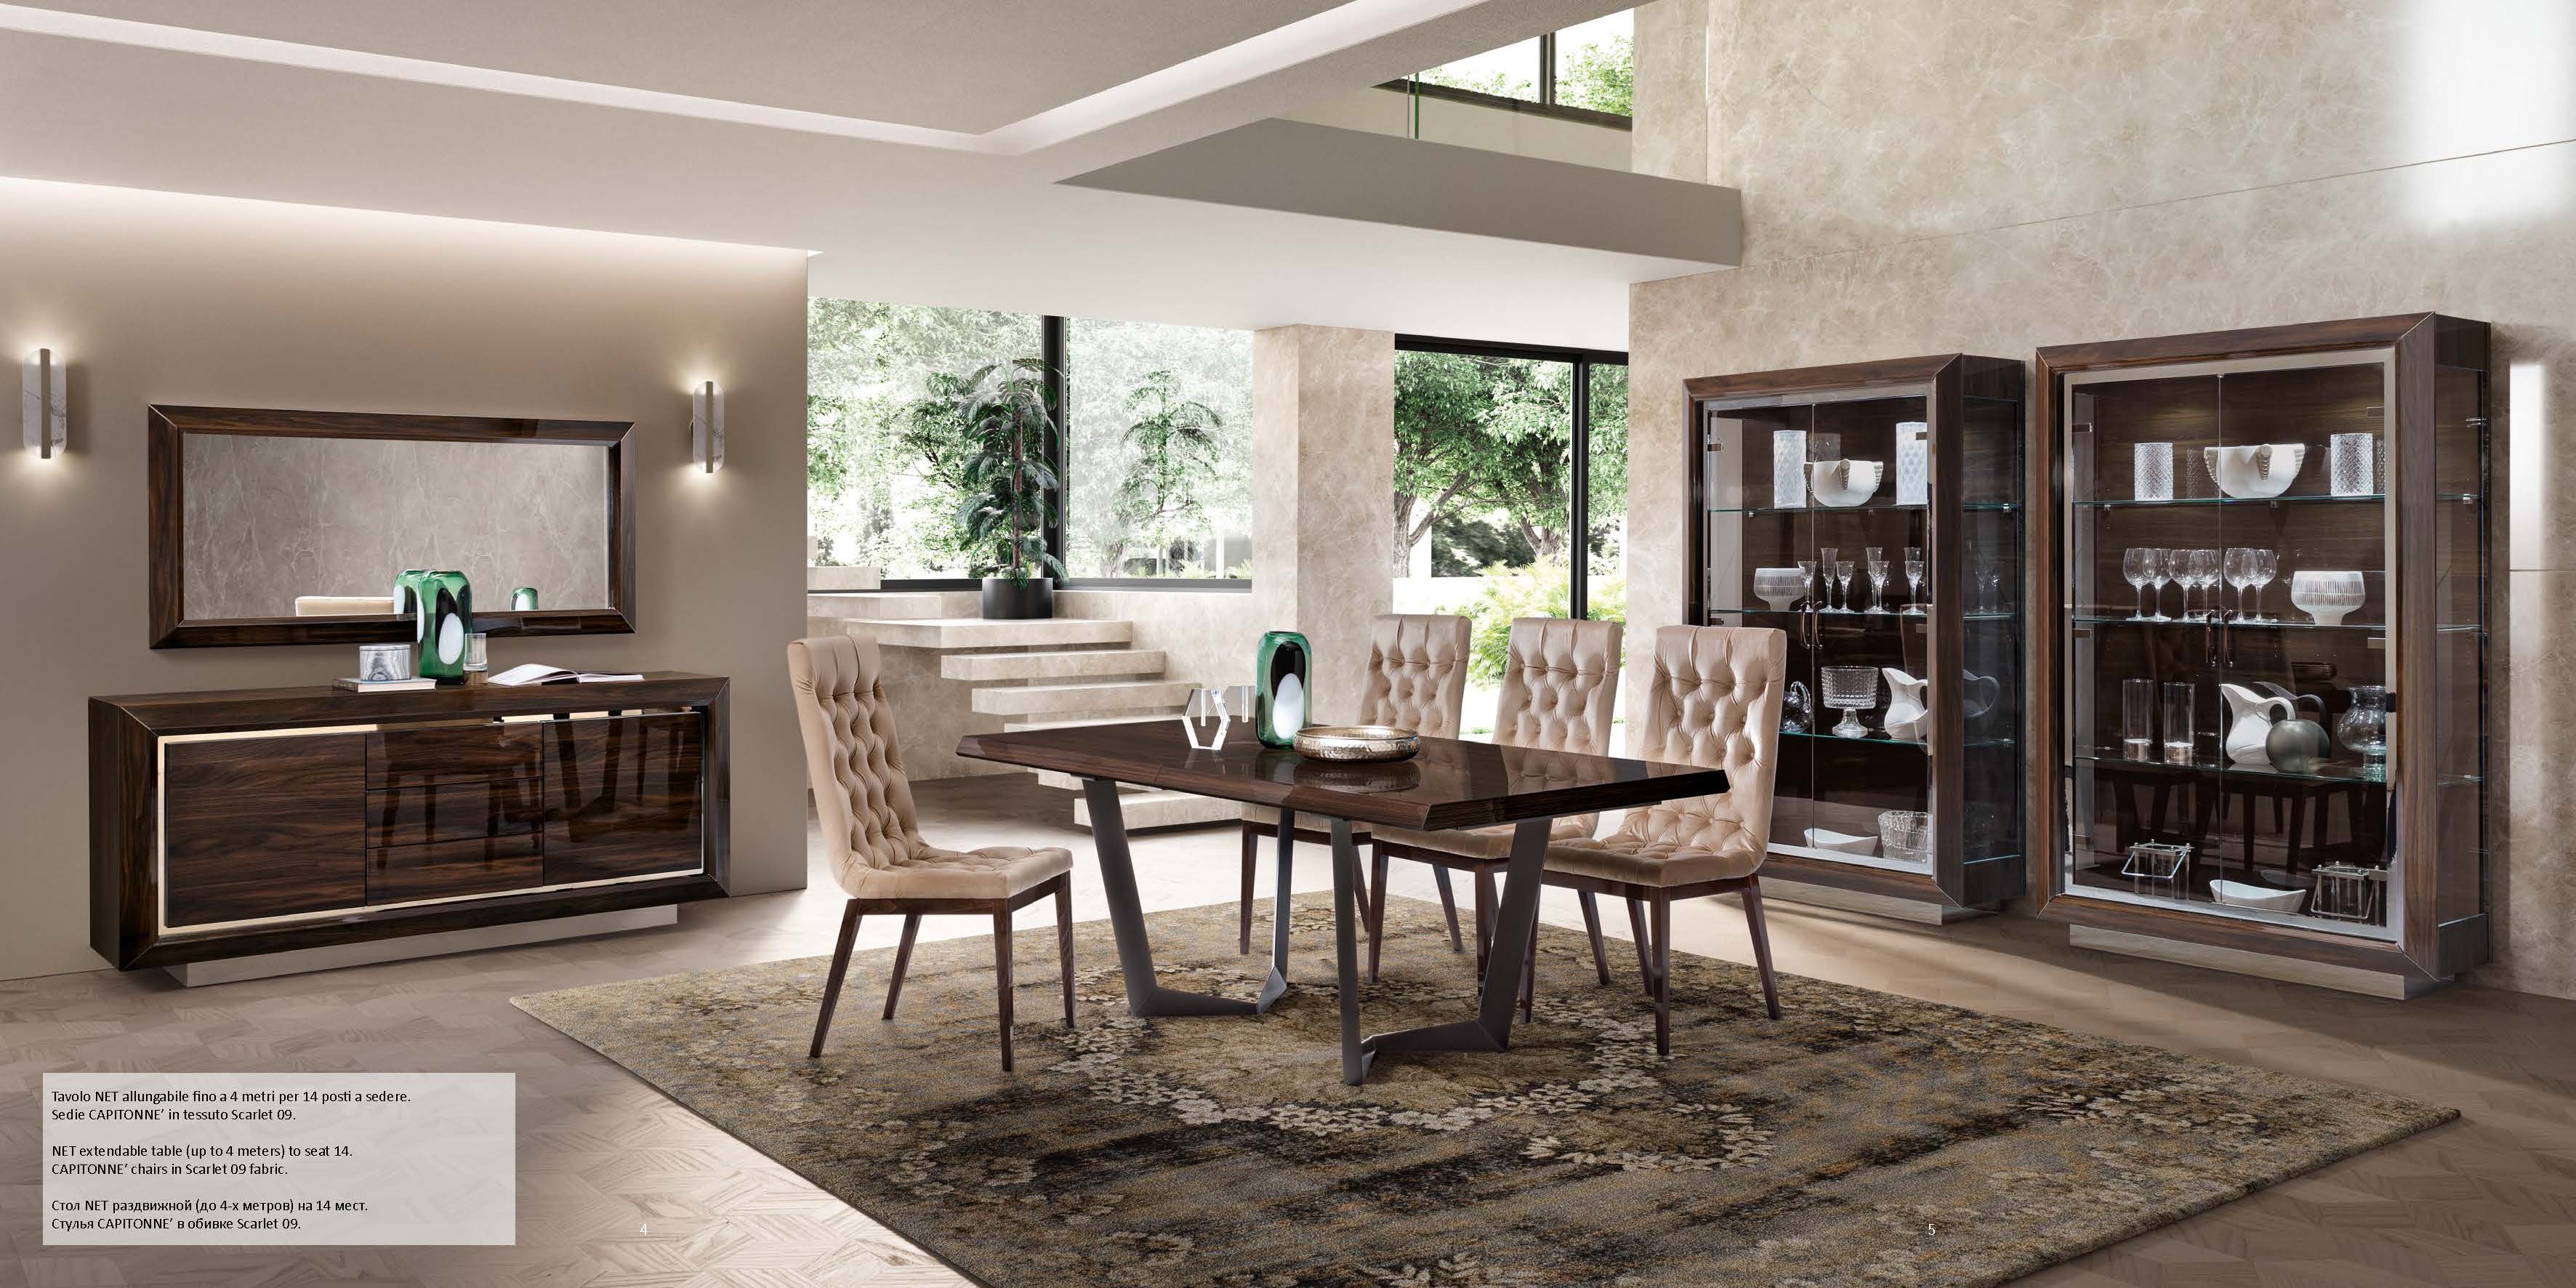 Dining Room Furniture Classic Dining Room Sets Elite Day Walnut Dining Additional items